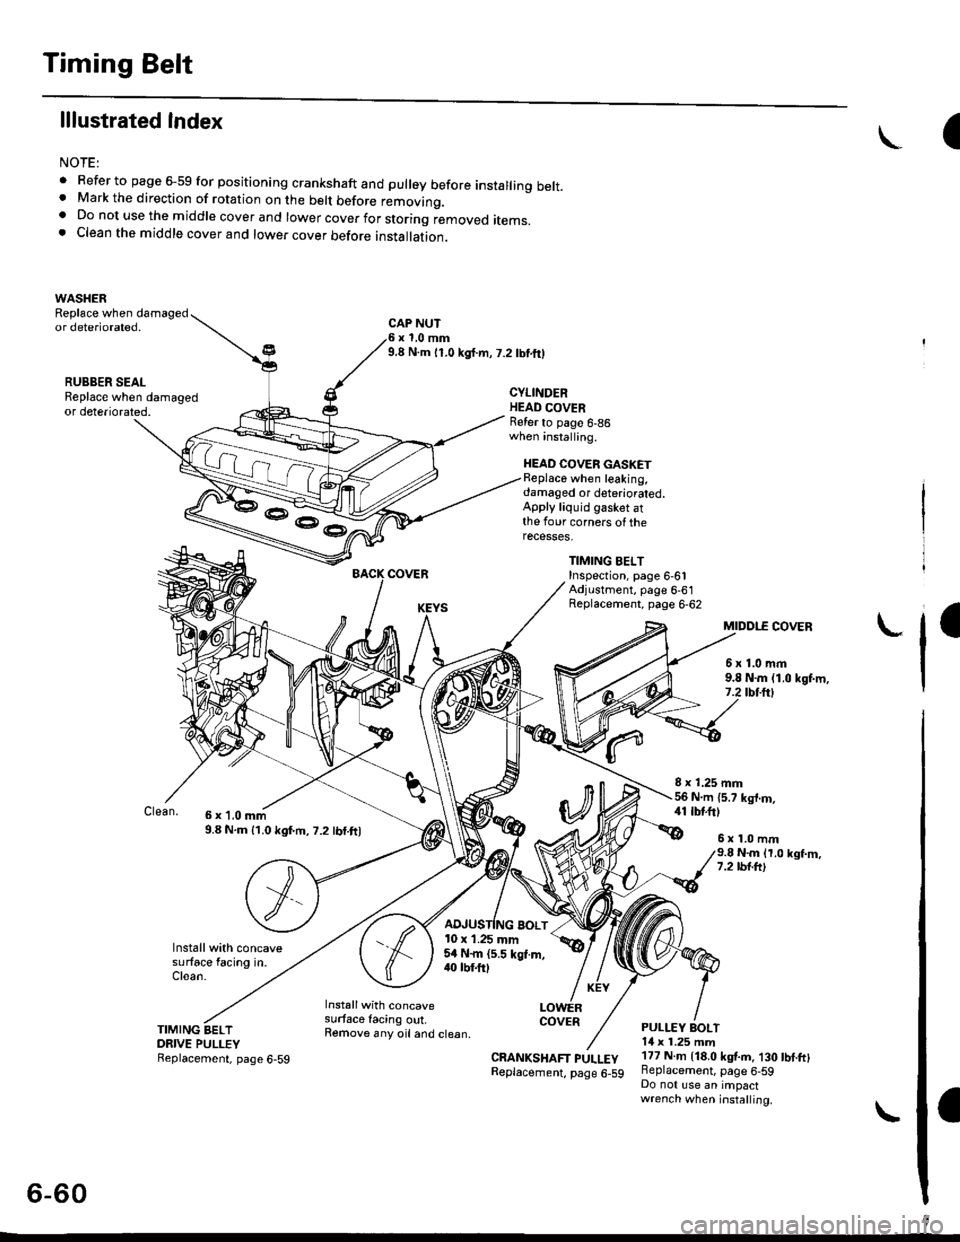 HONDA CIVIC 1997 6.G Workshop Manual Timing Belt
lllustrated Index
NOTE:
. Refer to page 6-59 for positioning crankshaft and pulley before installing belt.. Mark the direction of rotation on the belt before removino.a Do not use the midd